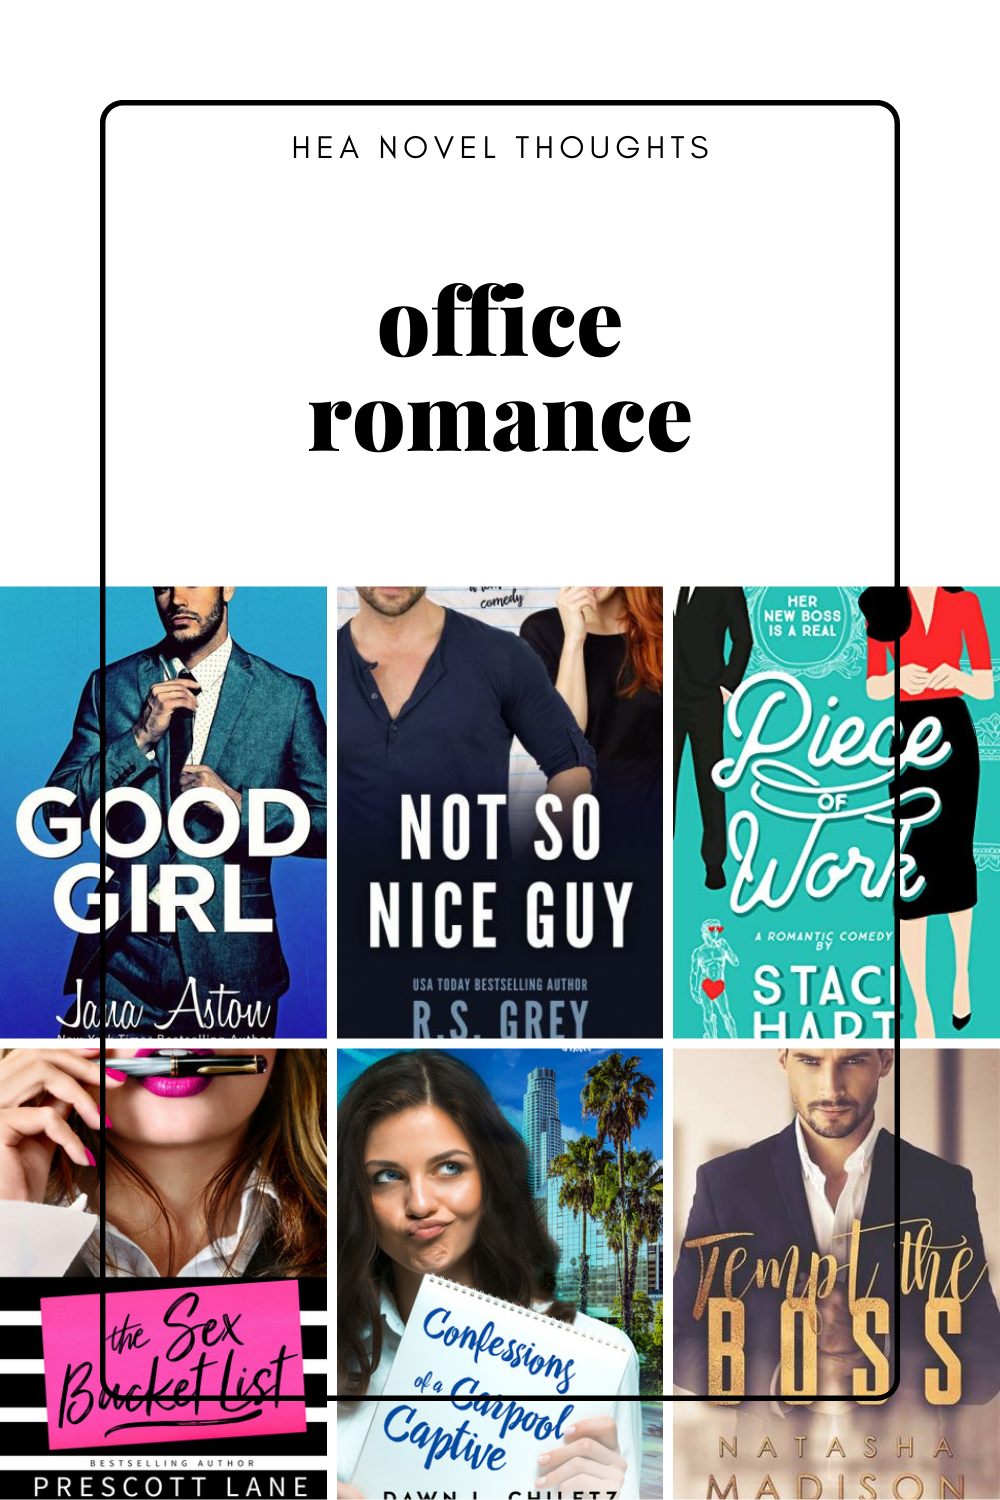 The Hottest Office Romances - HEA Novel Thoughts